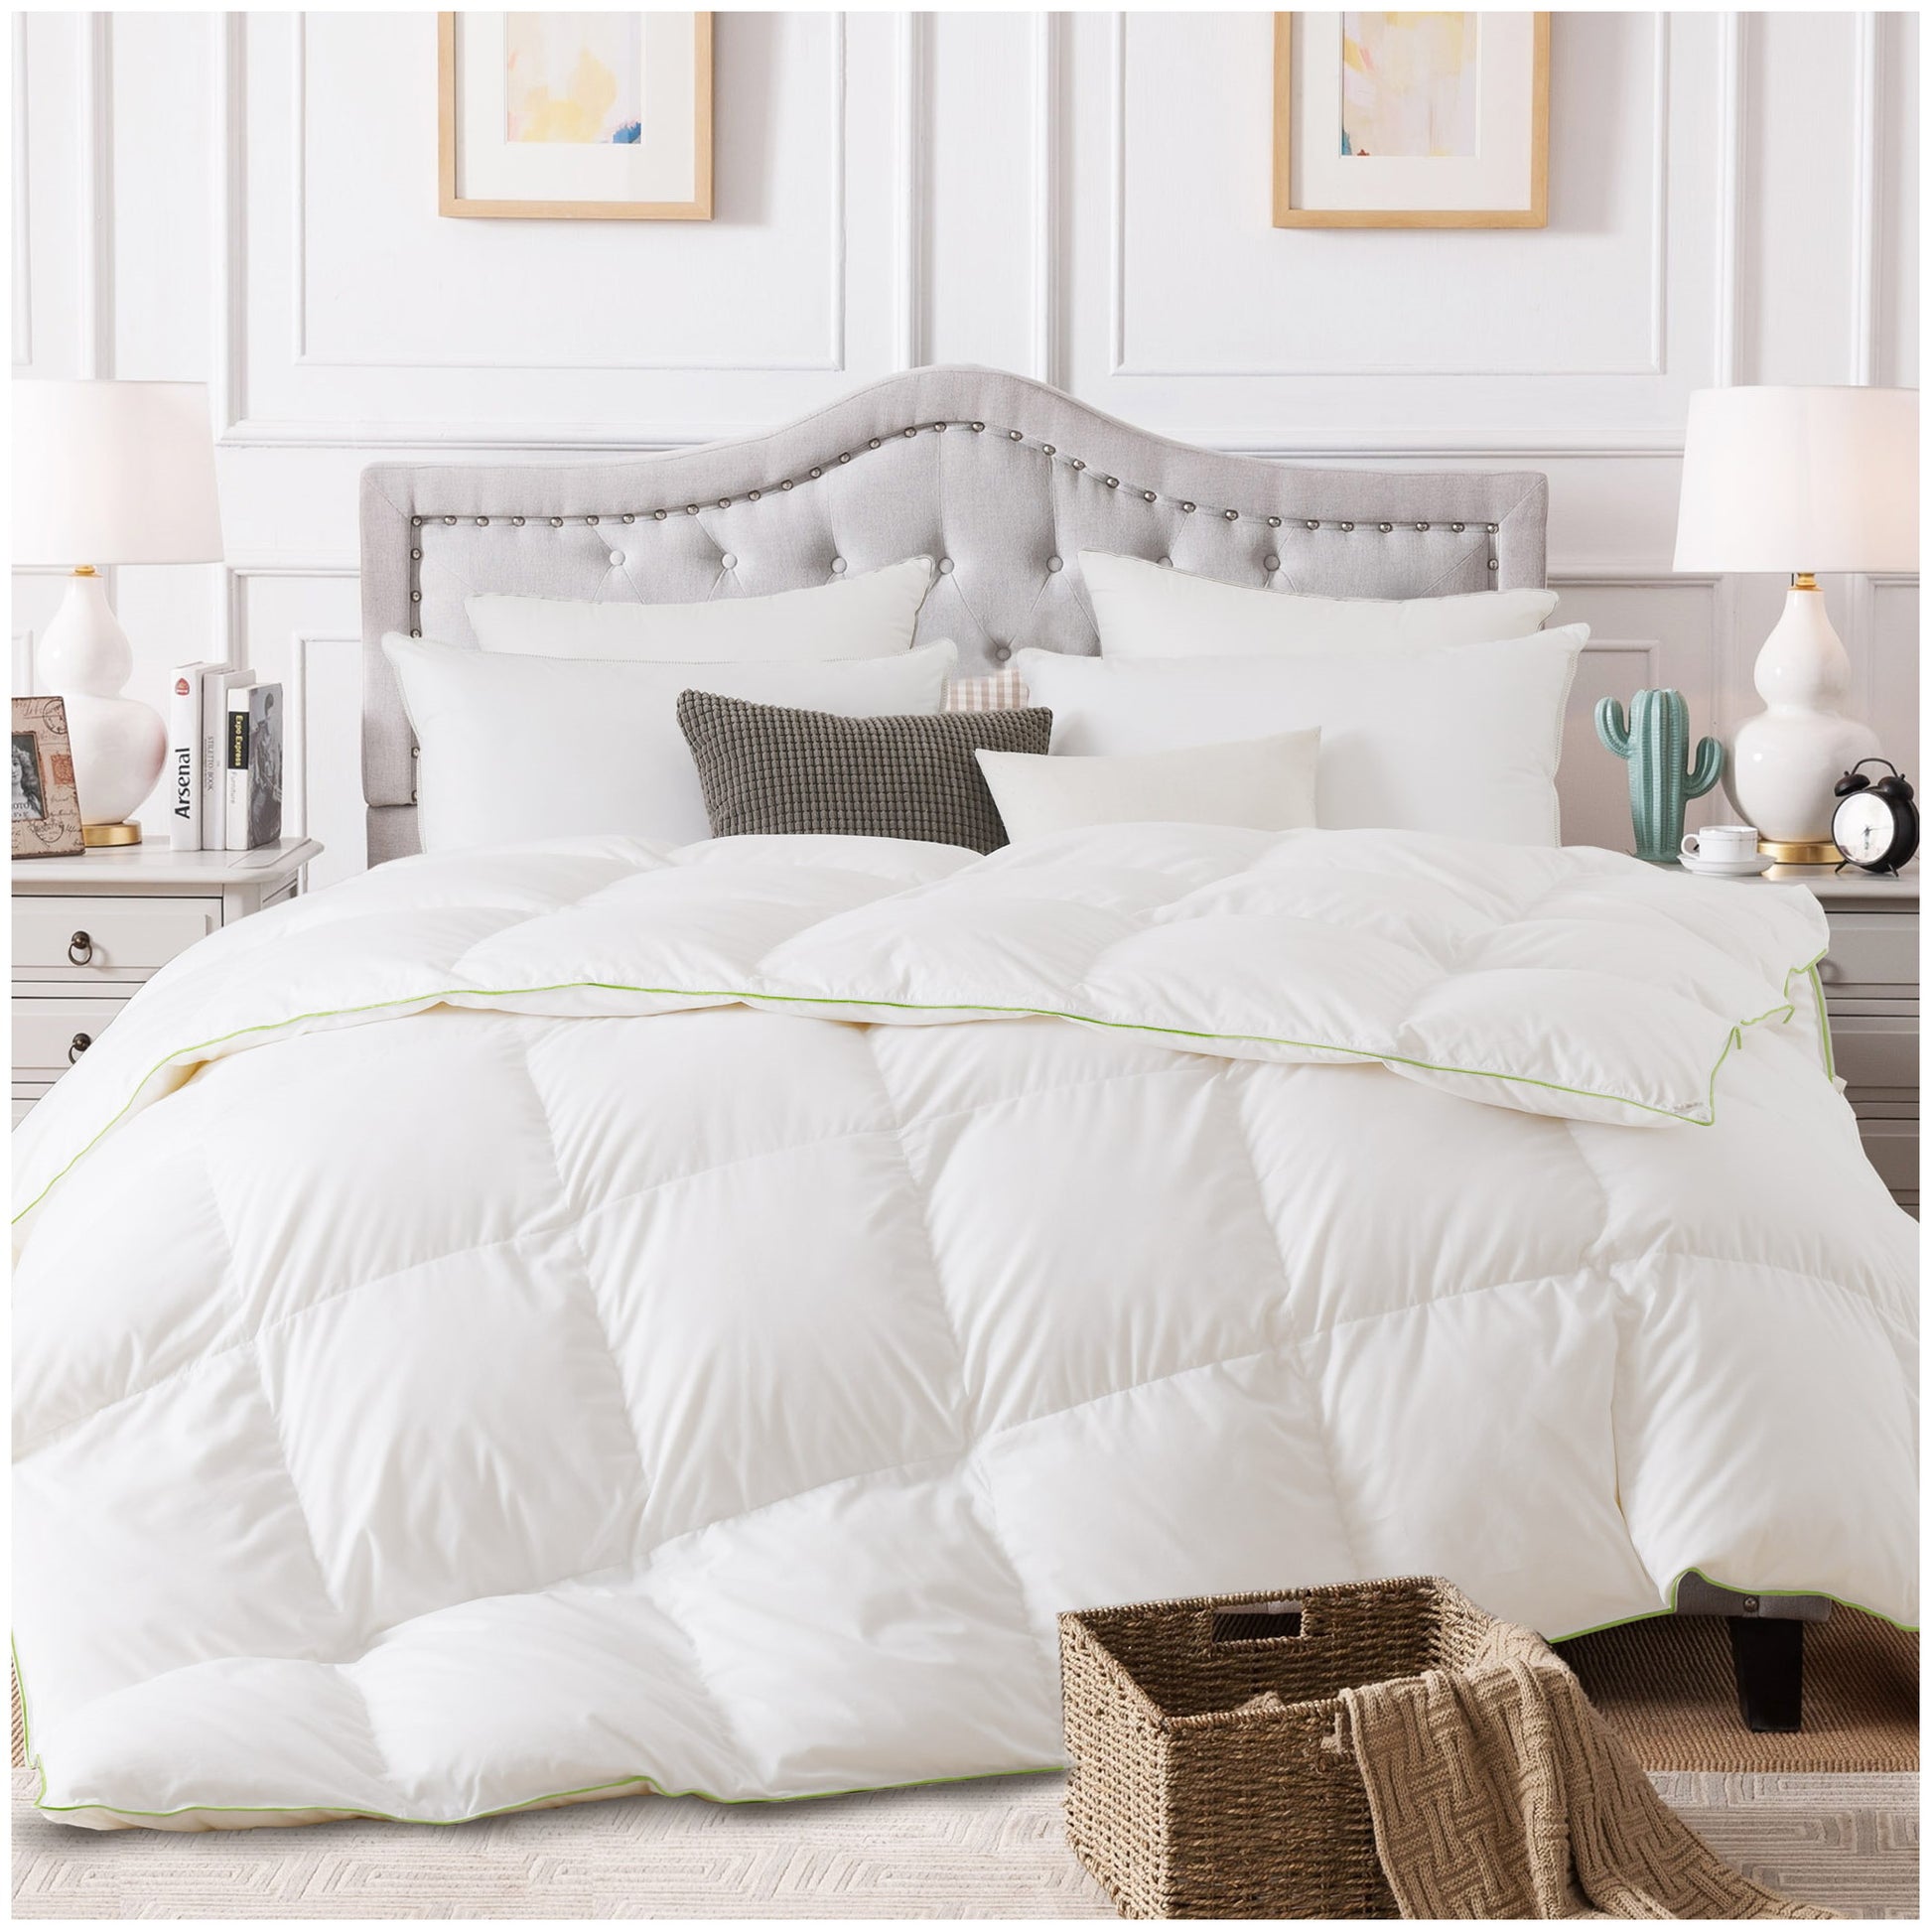 KASENTEX Warm Premium White Goose Down Comforter with Contemporary Green Piped Edge, 100% Cotton Fabric, Hypoallergenic 750 Fill Power 30-54oz, Duvet Insert